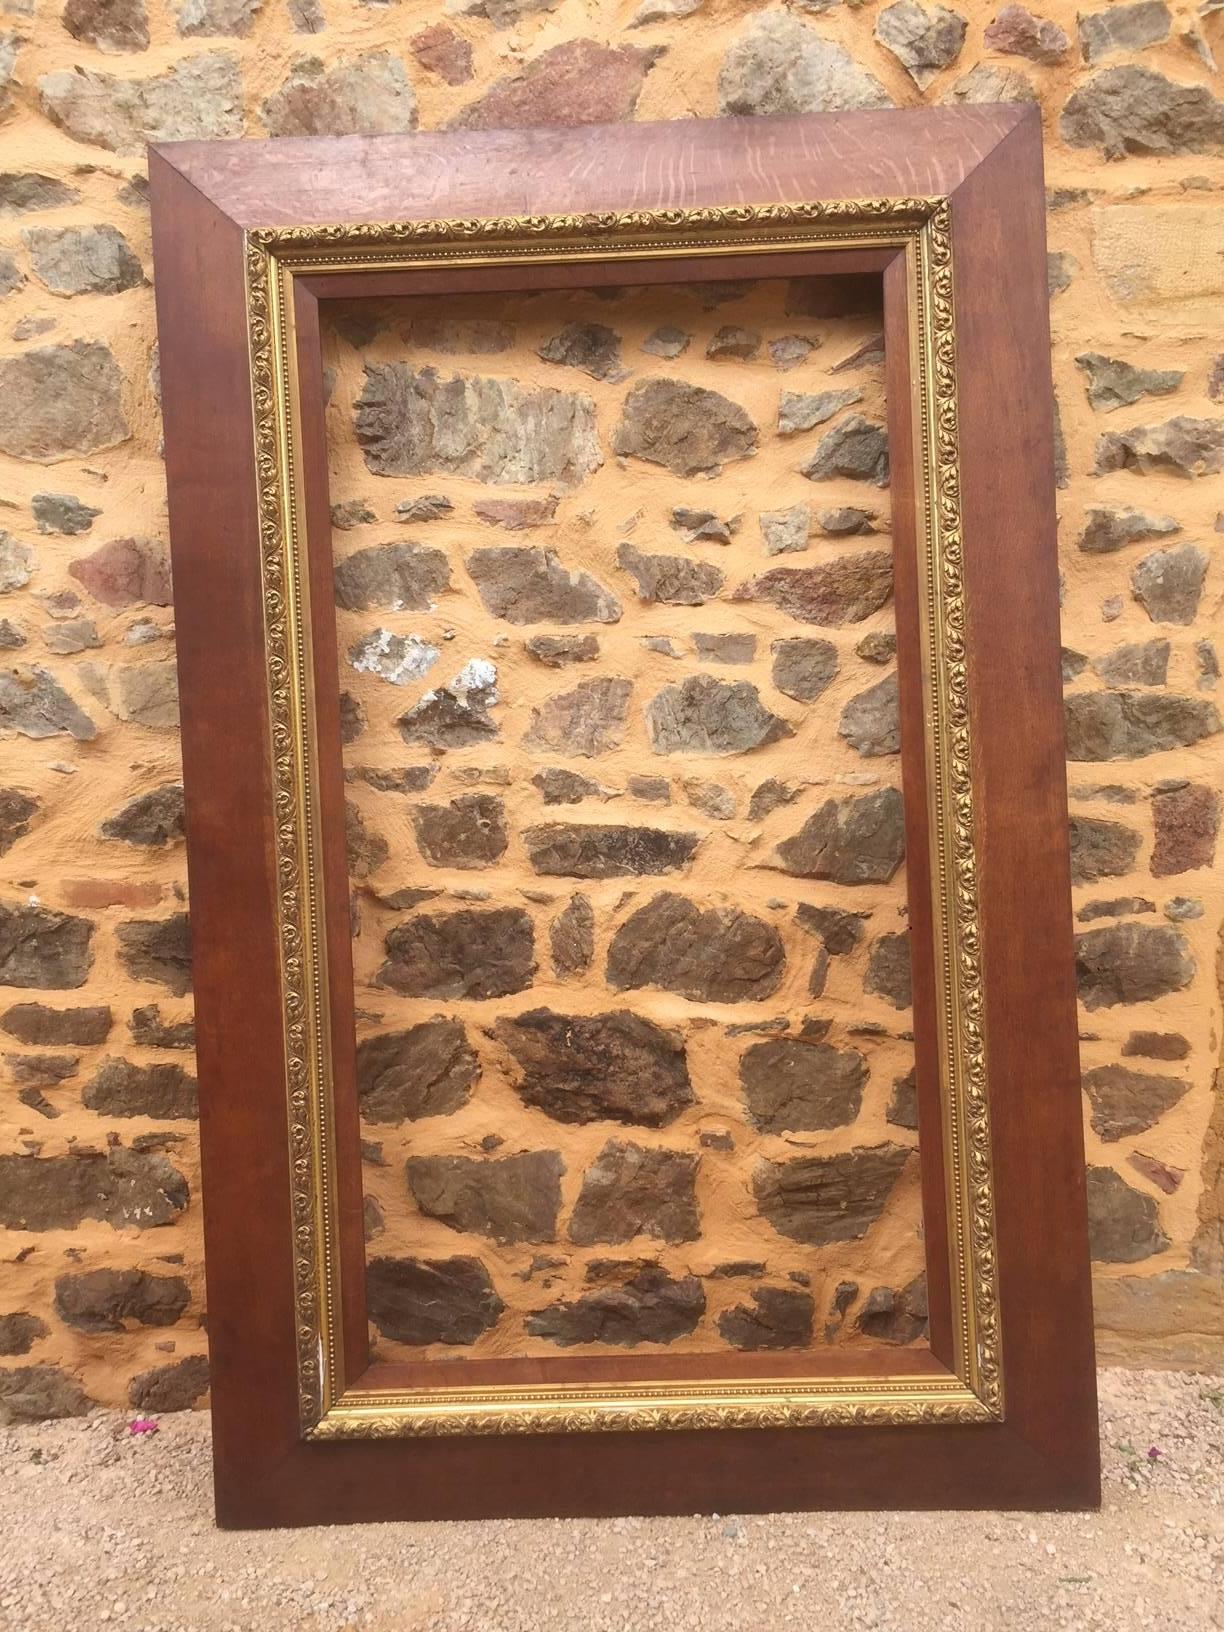 Big and rare French oak and golden moulding picture frame from the 1900s.
Beautiful quality.